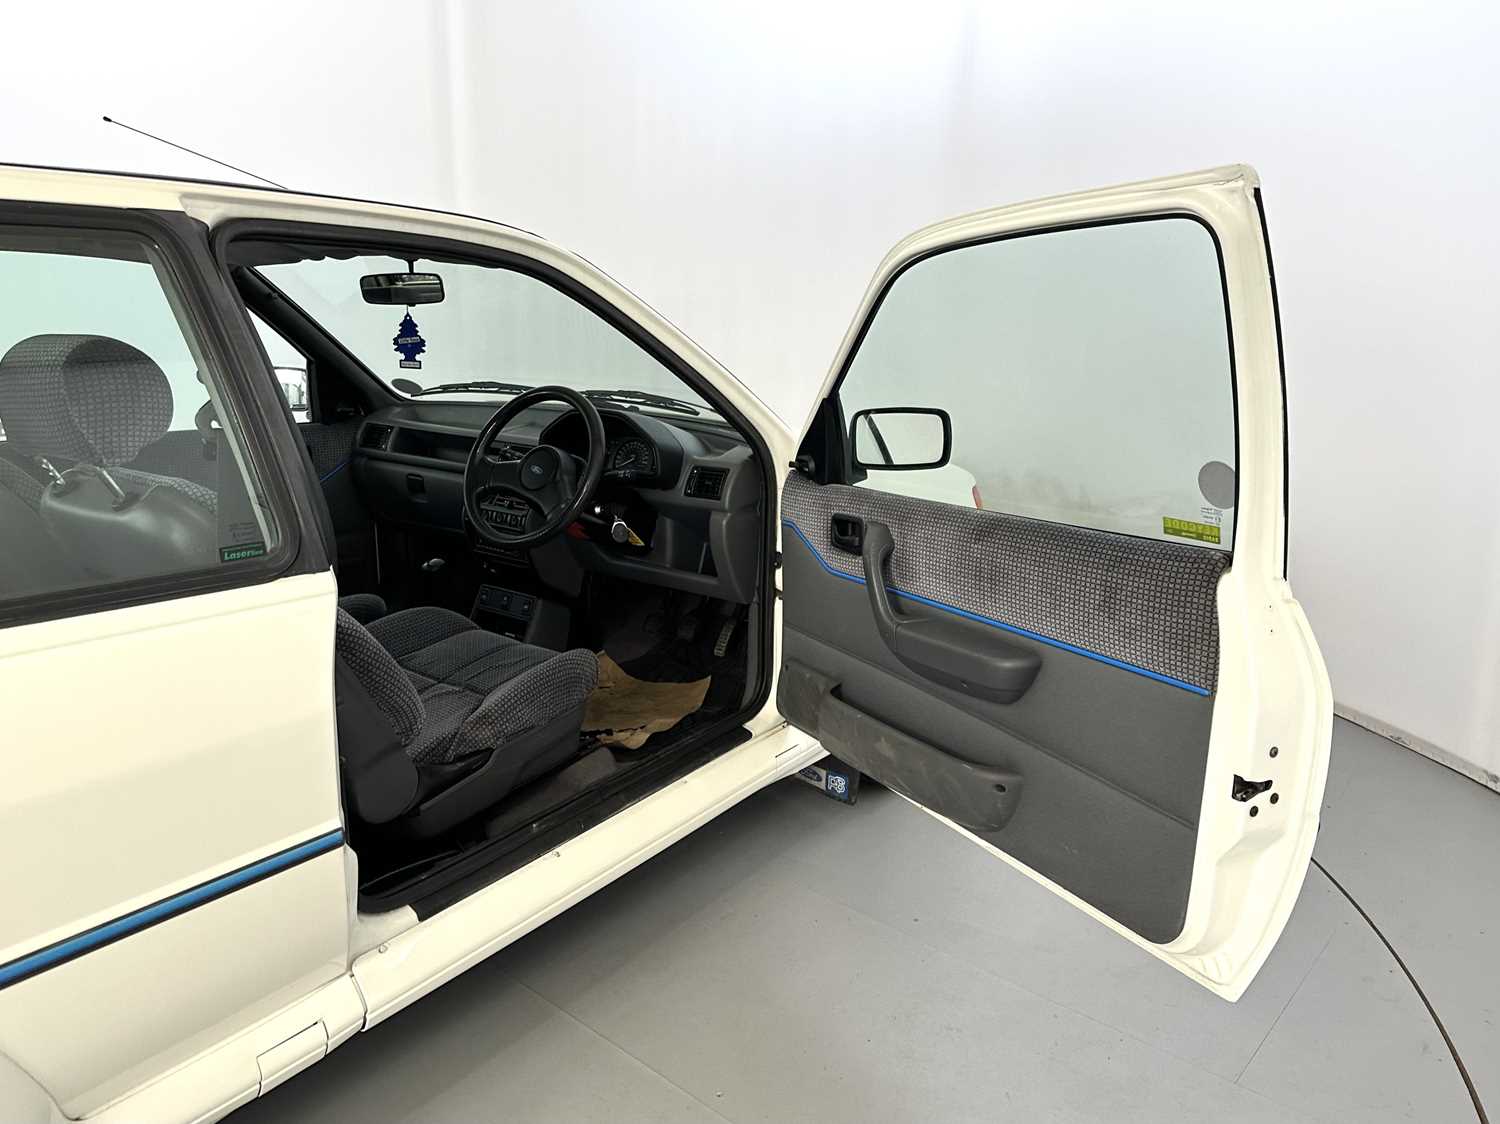 1991 Ford Fiesta XR2i - Image 17 of 30